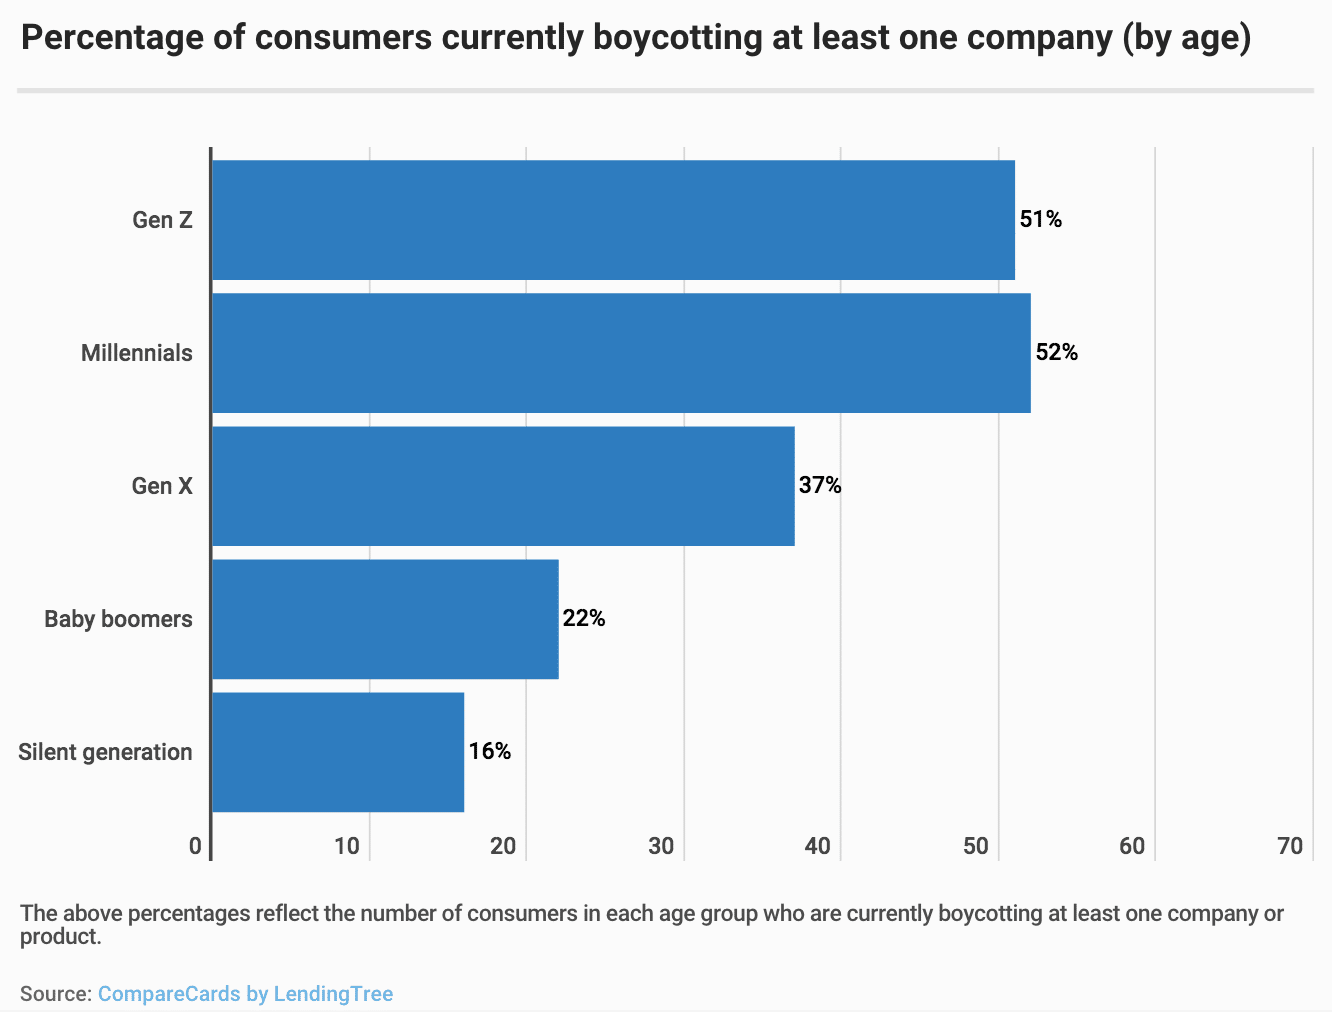 In wake of pandemic and politics, nearly 4 in 10 consumers currently boycotting a company